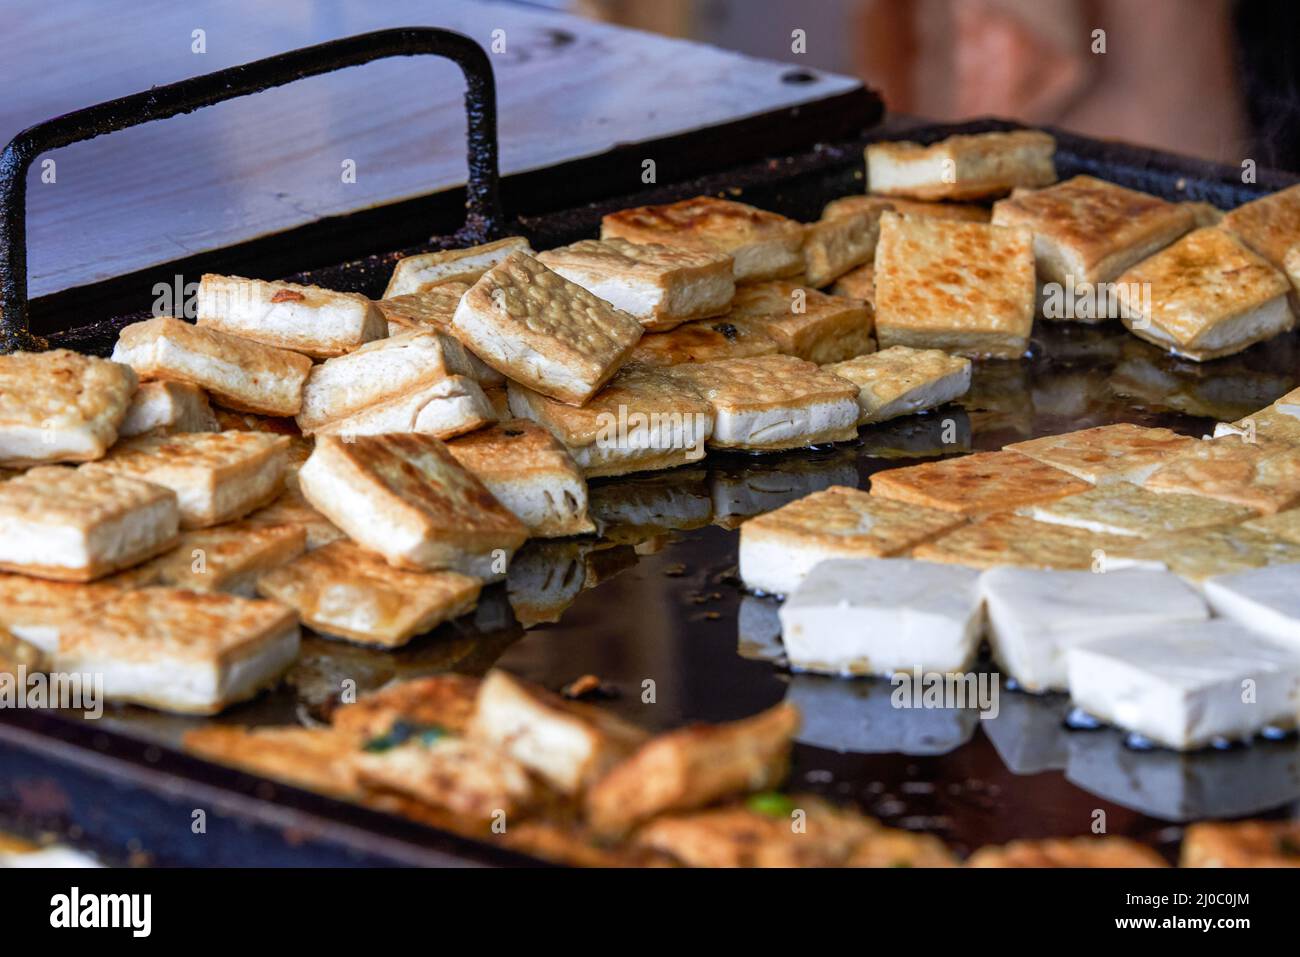 Golden tempting fried tofu on a food stand Stock Photo